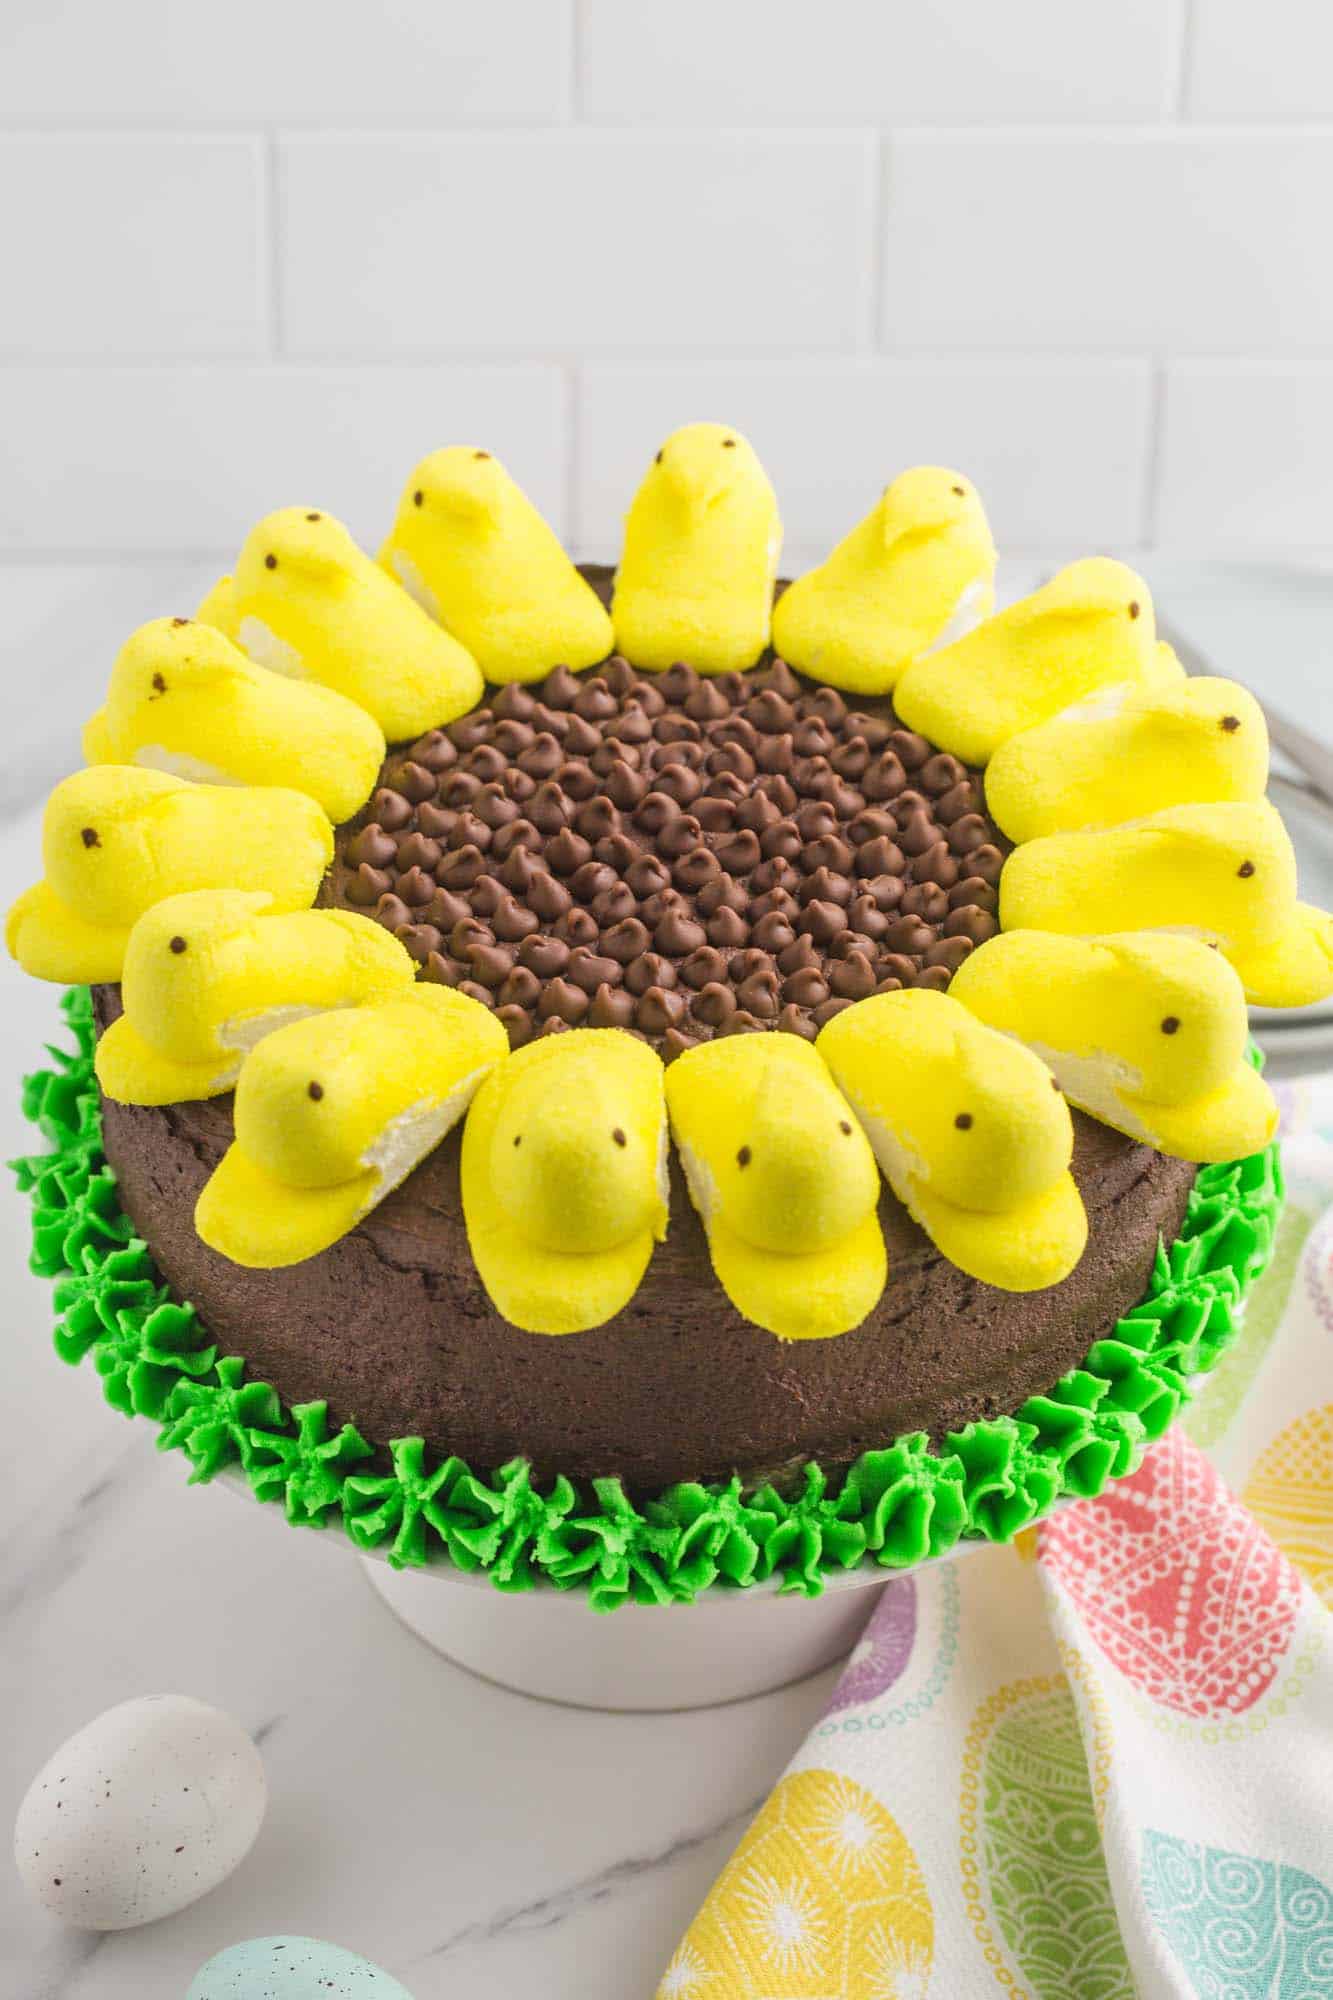 Chocolate cake decorated to look like a sunflower with yellow peeps